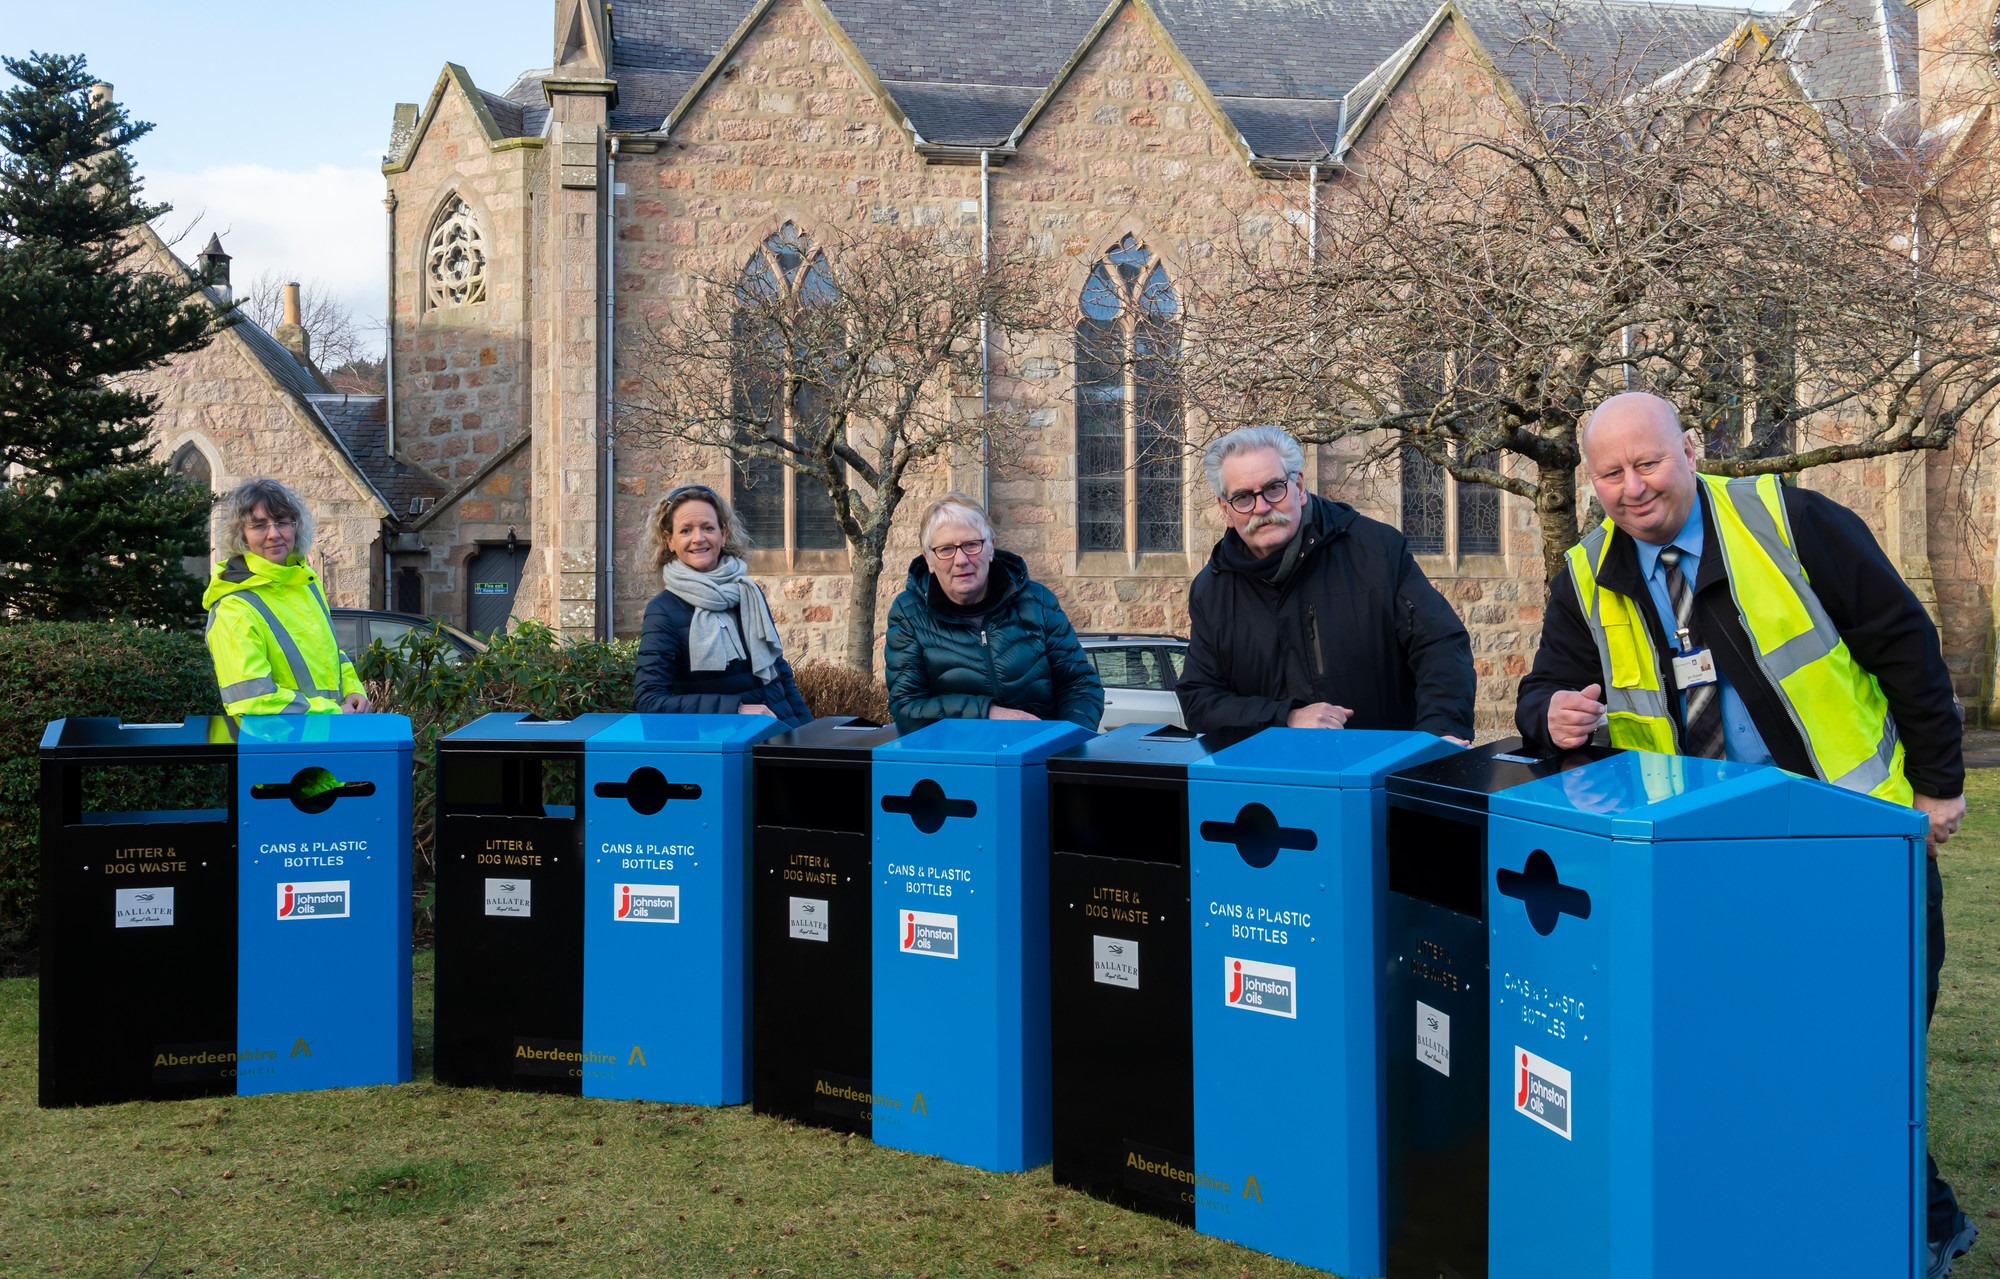 Lesley Forrest and Jim Donald from Aberdeenshire Council’s Waste Services along with community representatives Mairi Redhead, Pat Downie and William Braid.